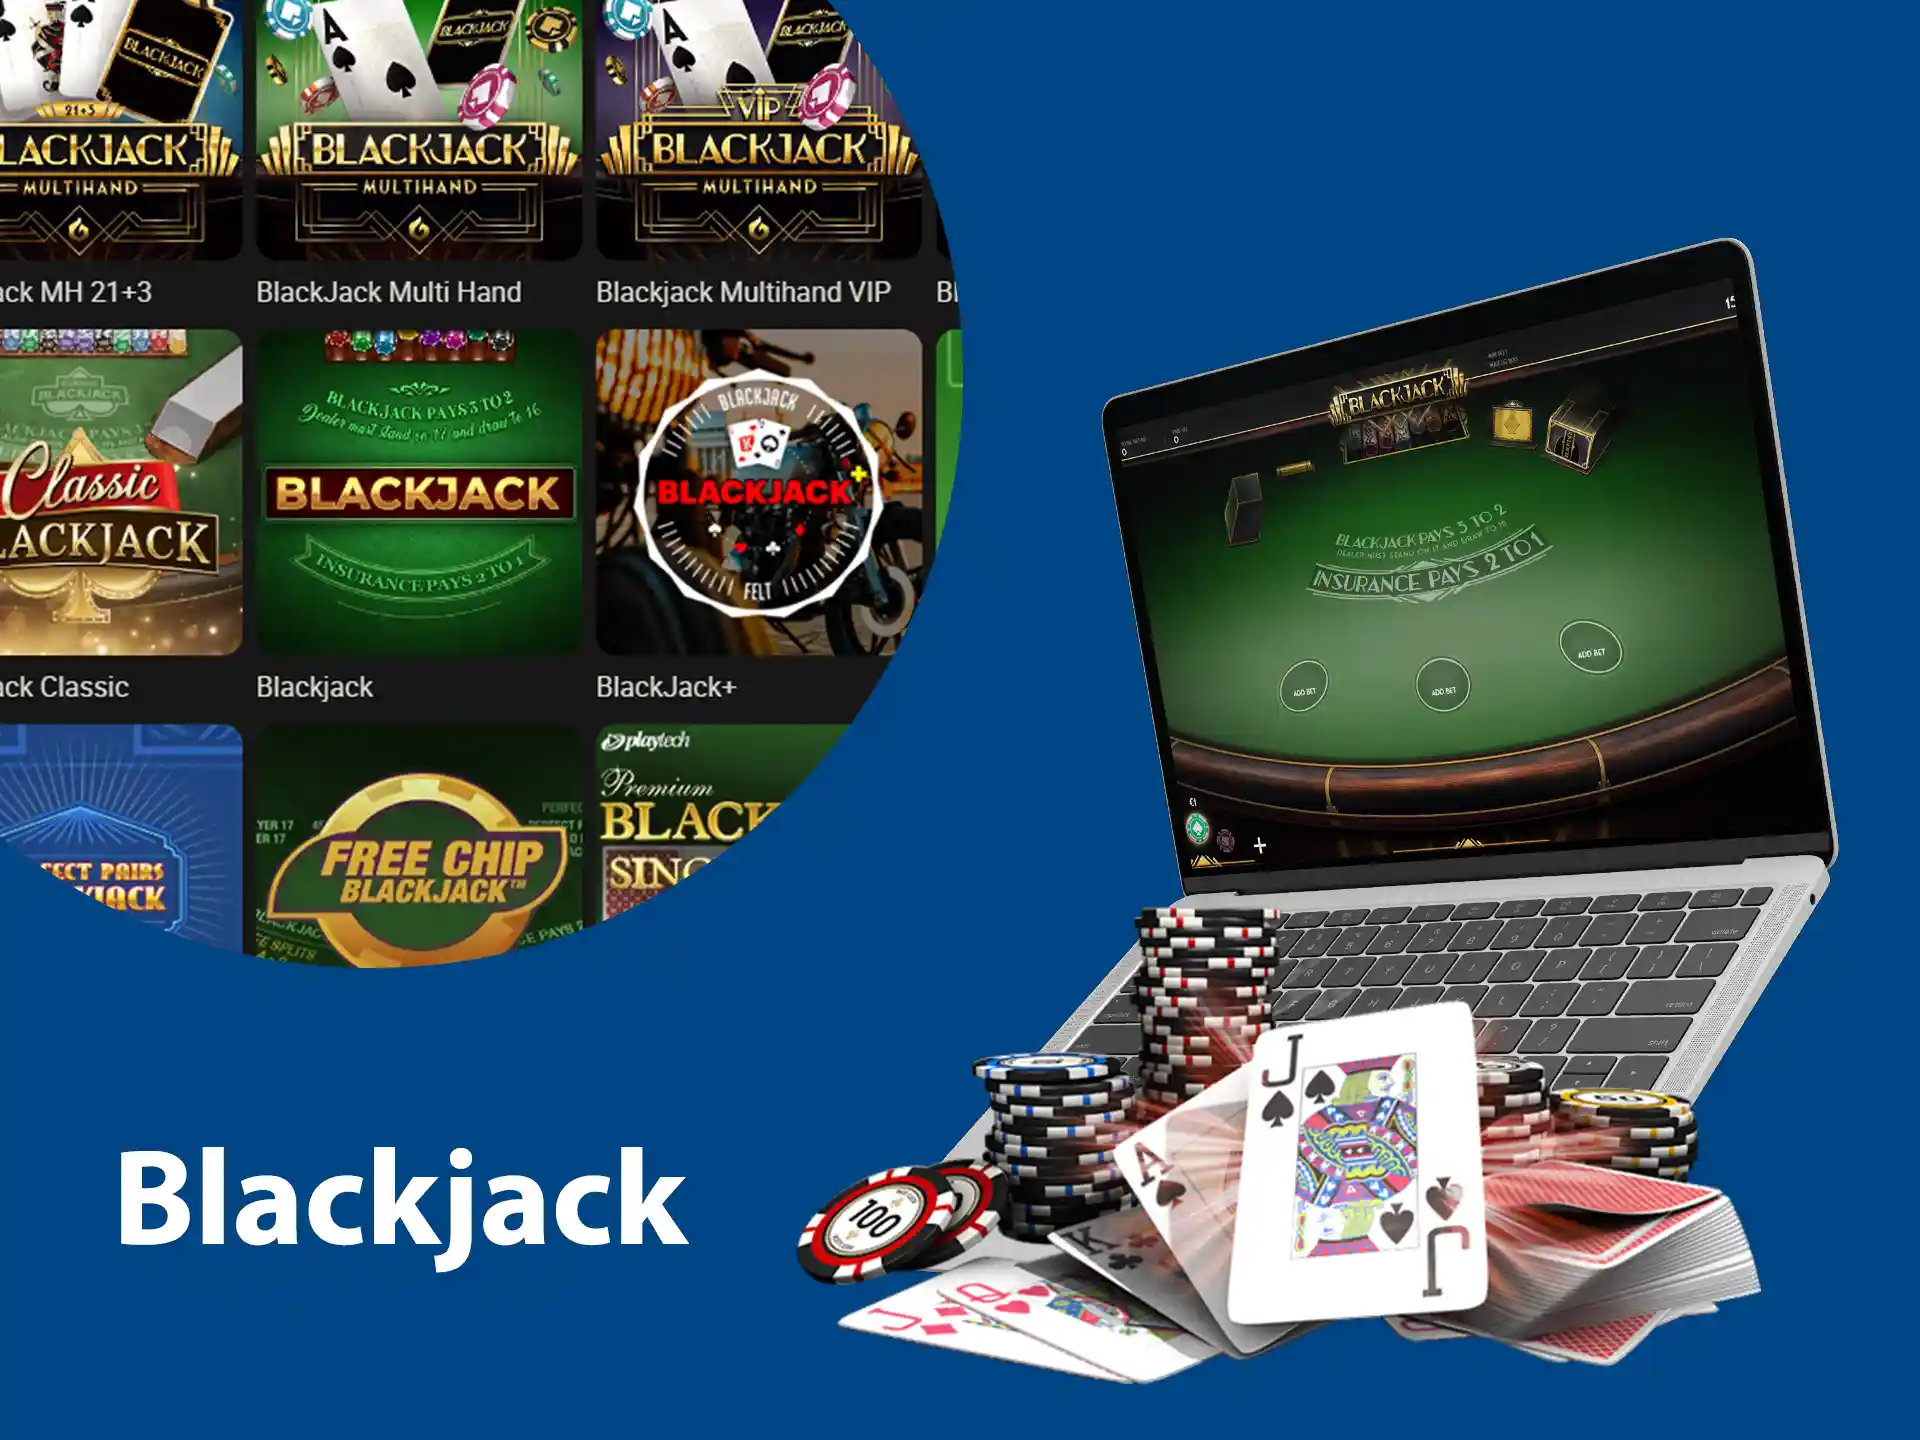 The card game Blackjack is one of the most sought after casino games, a frequent choice of players.